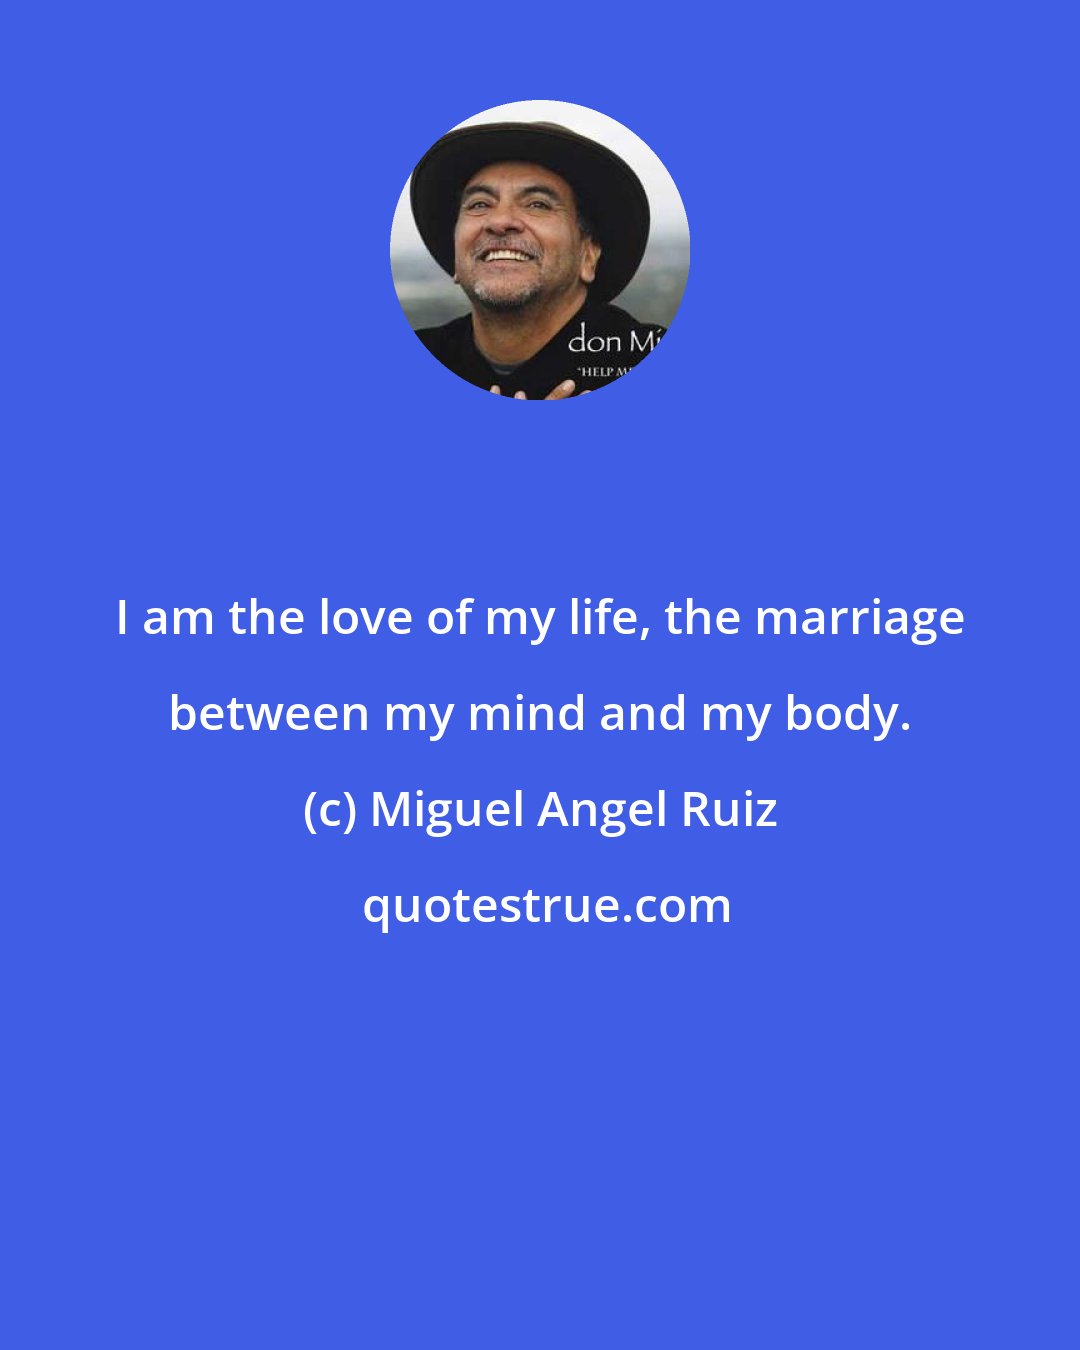 Miguel Angel Ruiz: I am the love of my life, the marriage between my mind and my body.